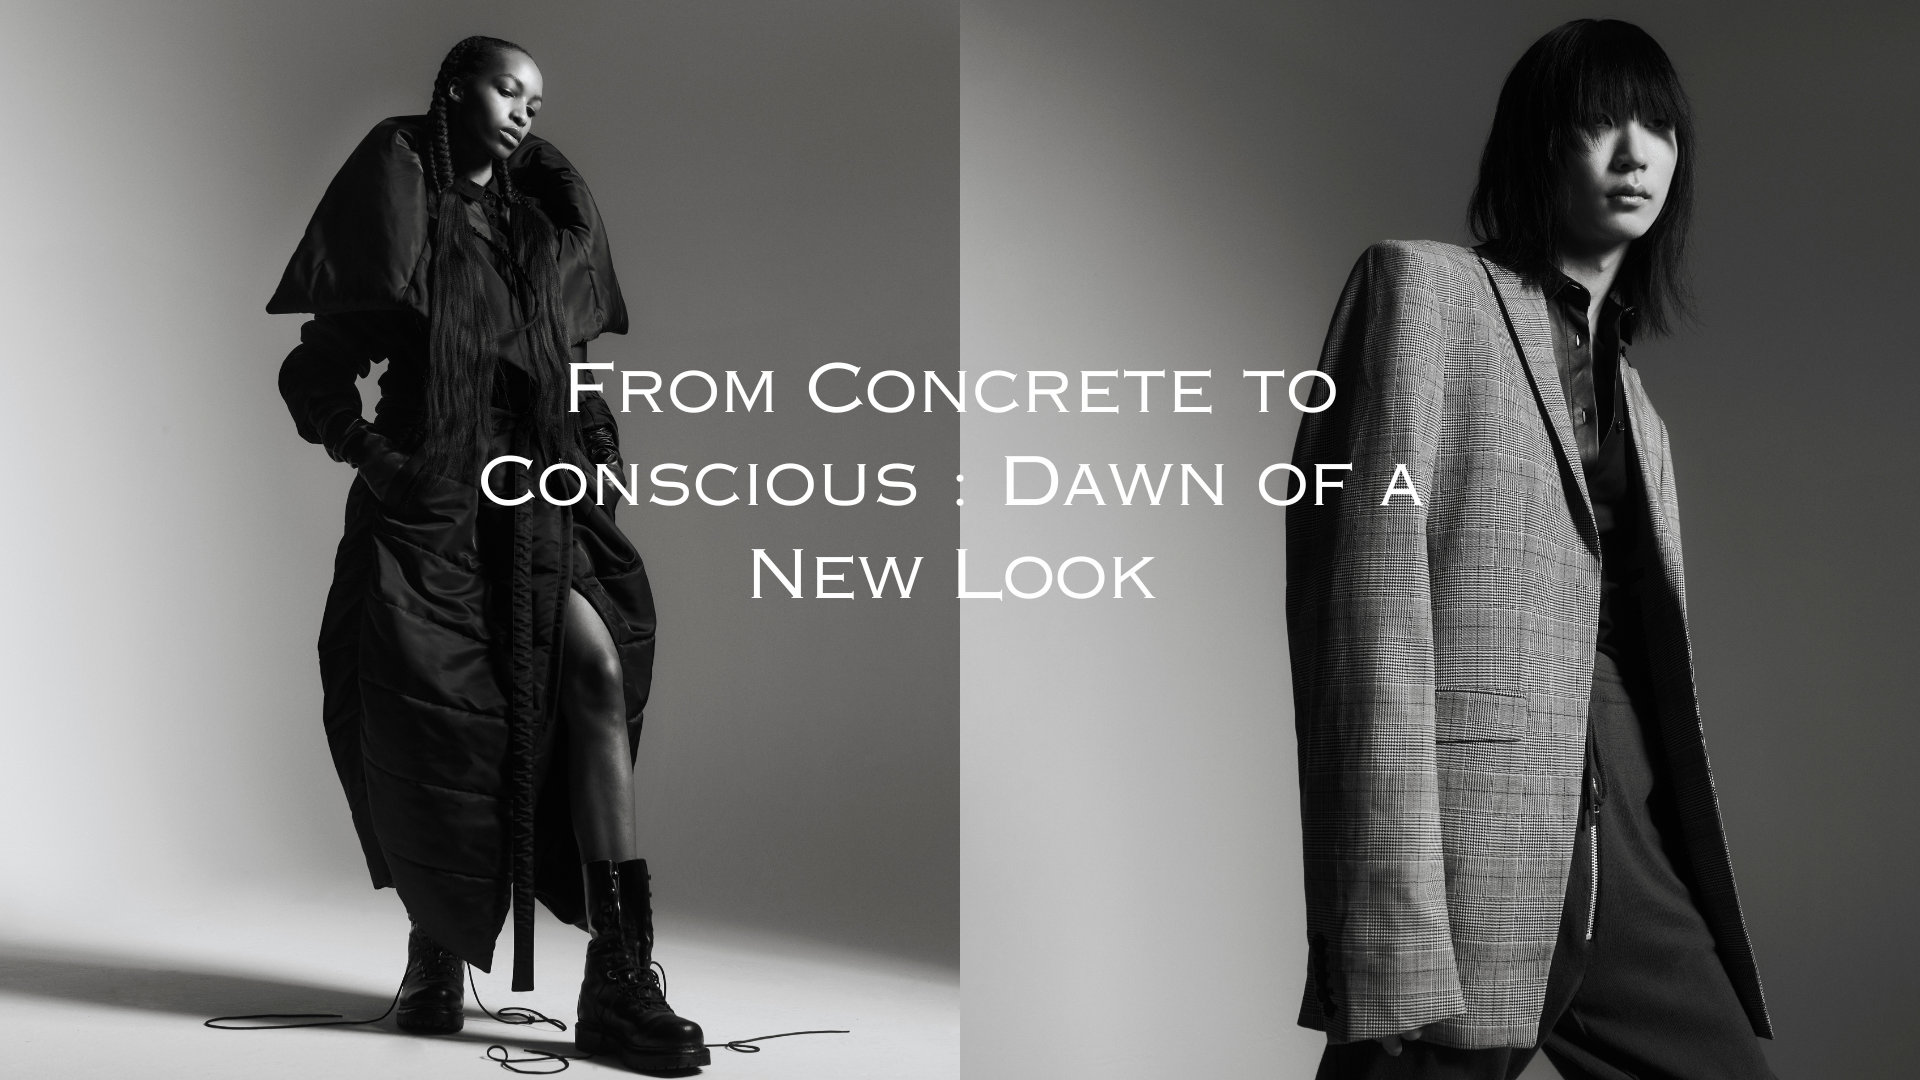 From Concrete to Conscious : Dawn of a New Look